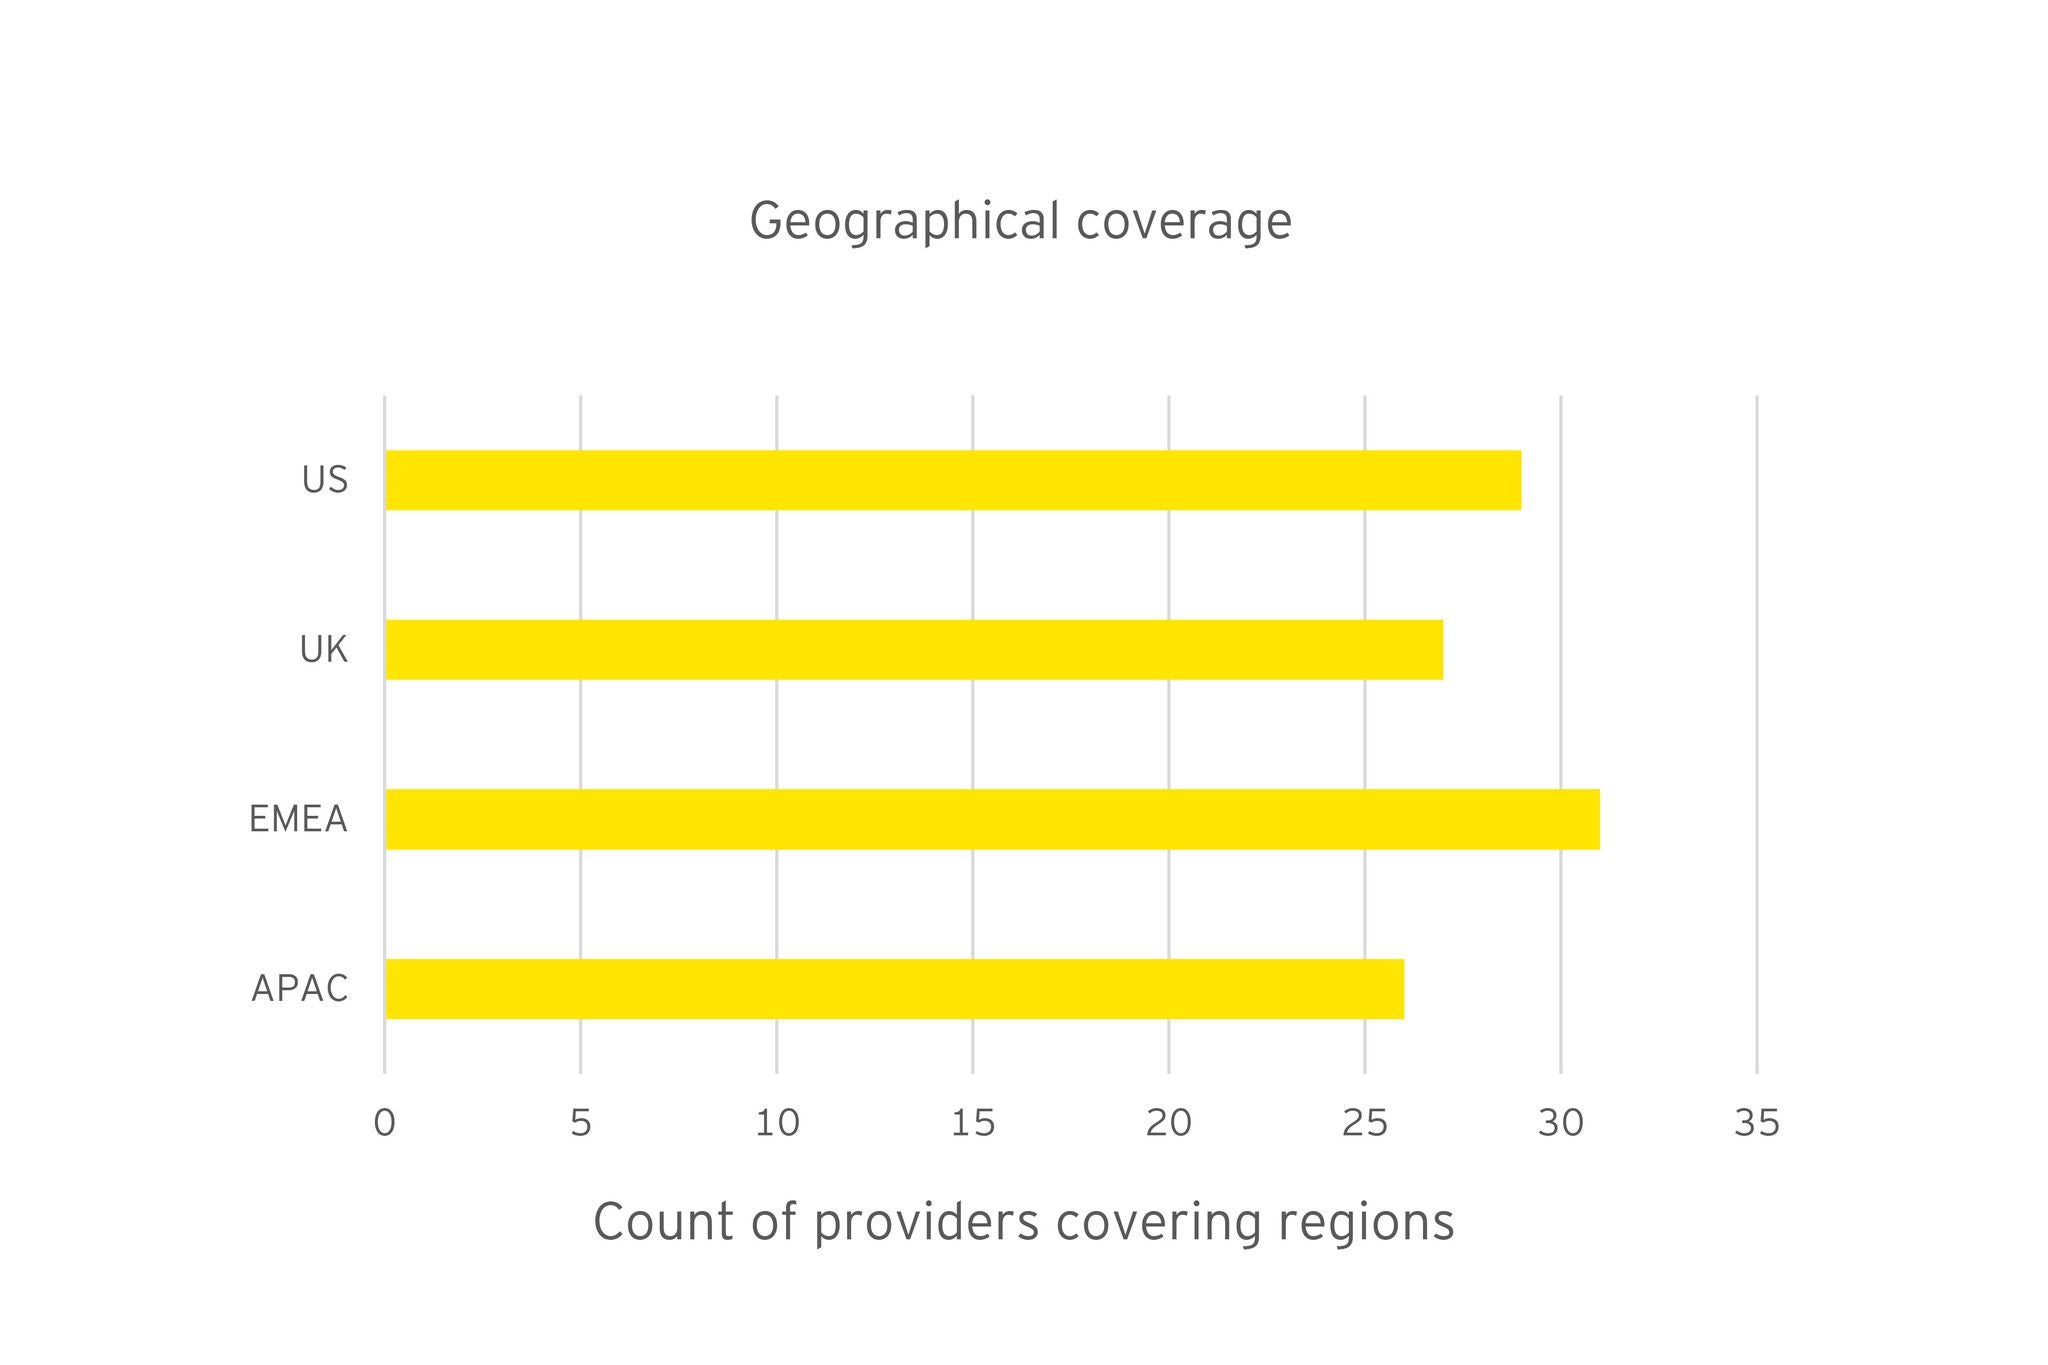 ey-geographical-coverage-by-region-of-esg-data-providers.jpg